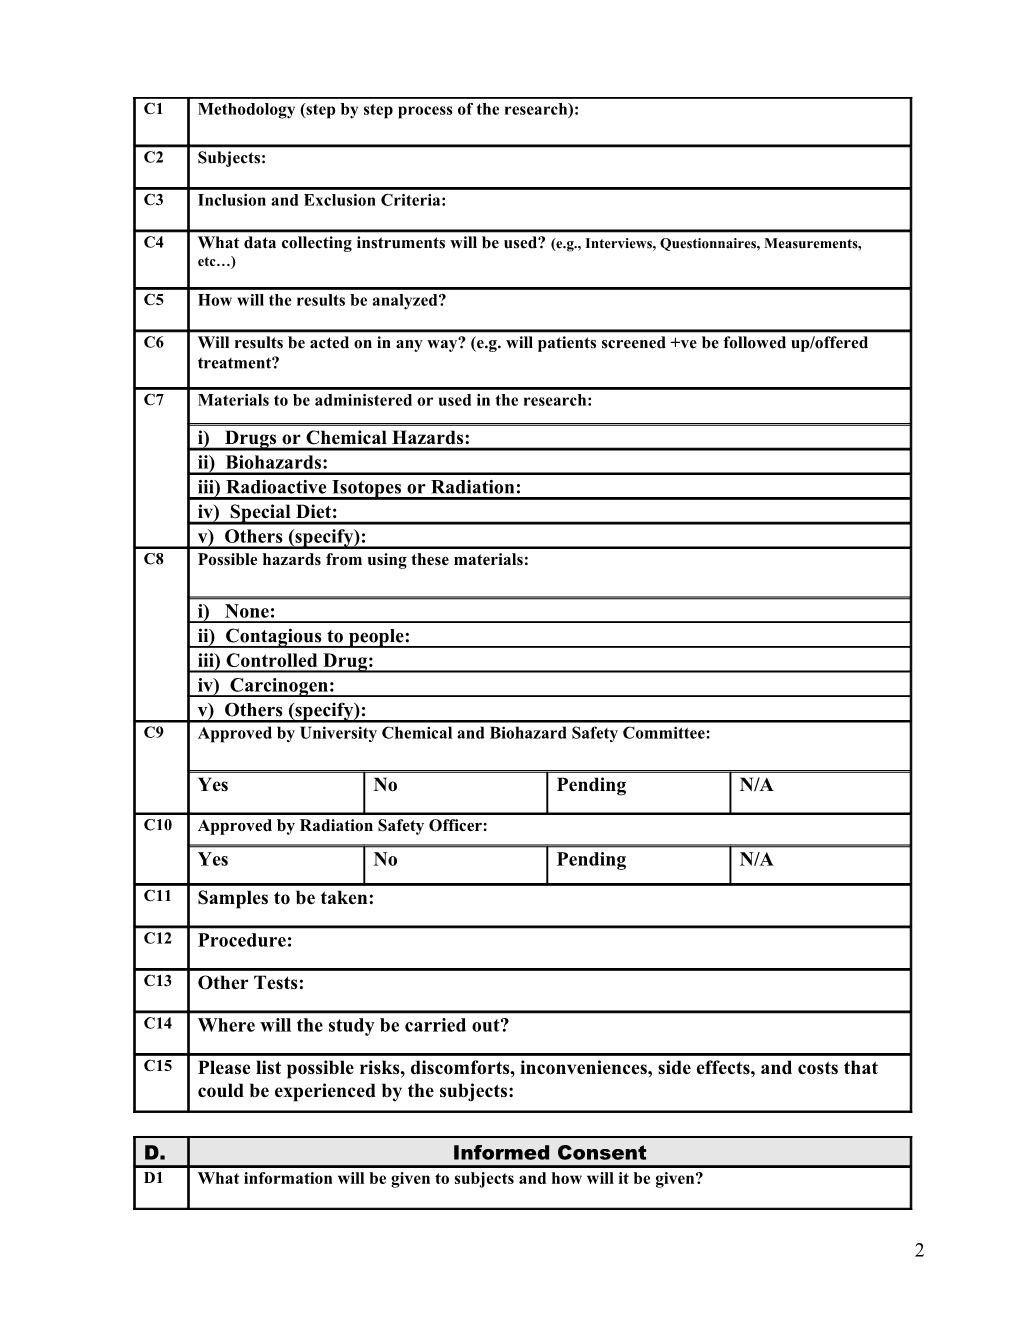 Application Form 1: Research Involving Human Subjects